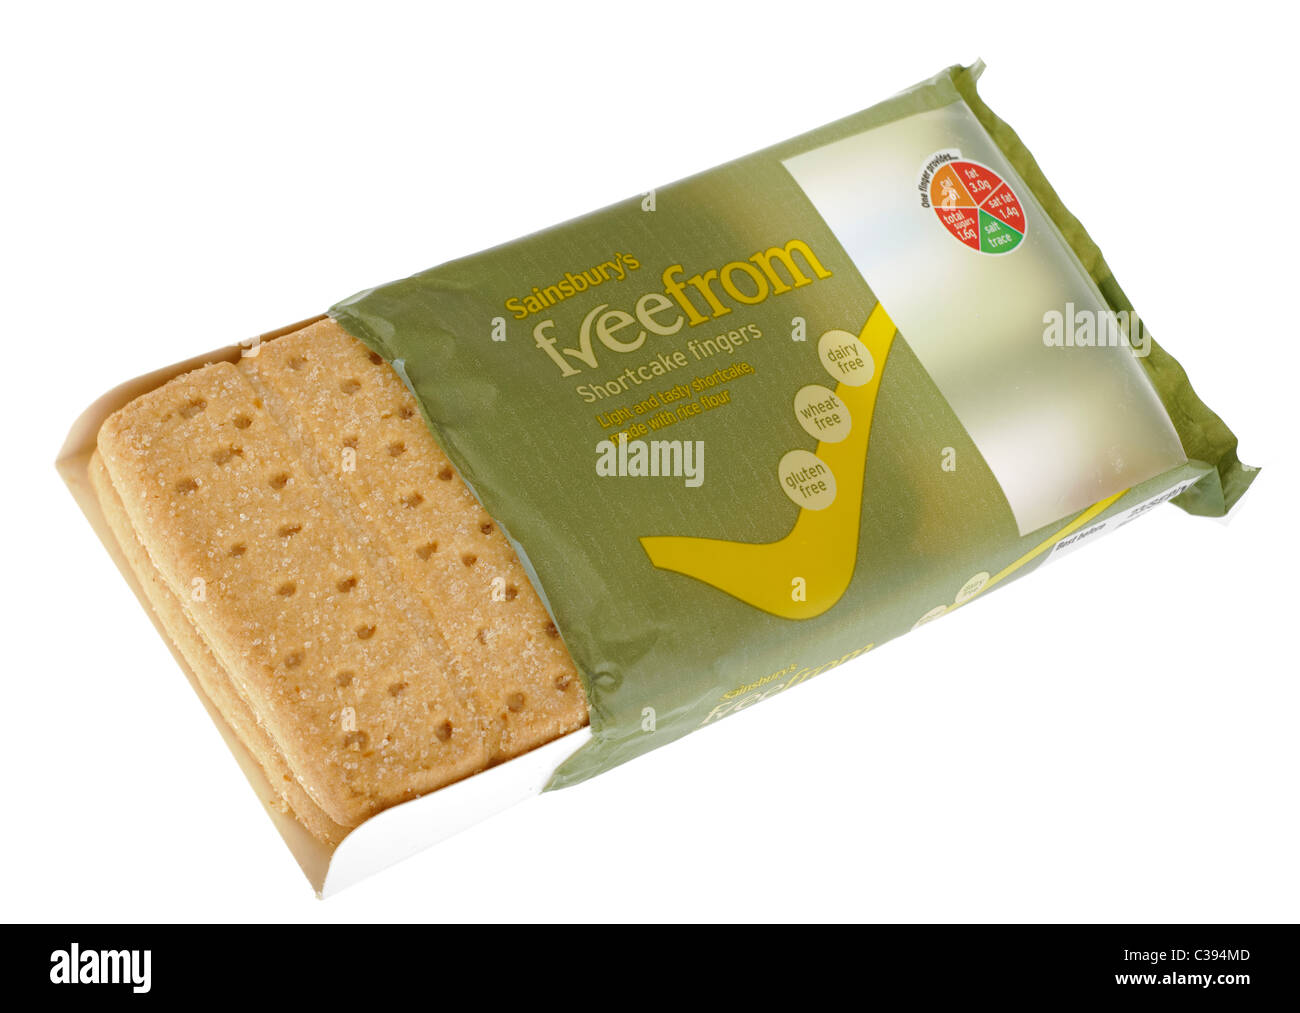 Packet of Sainsburys Freefrom free from gluten wheat and dairy shortcake fingers Stock Photo